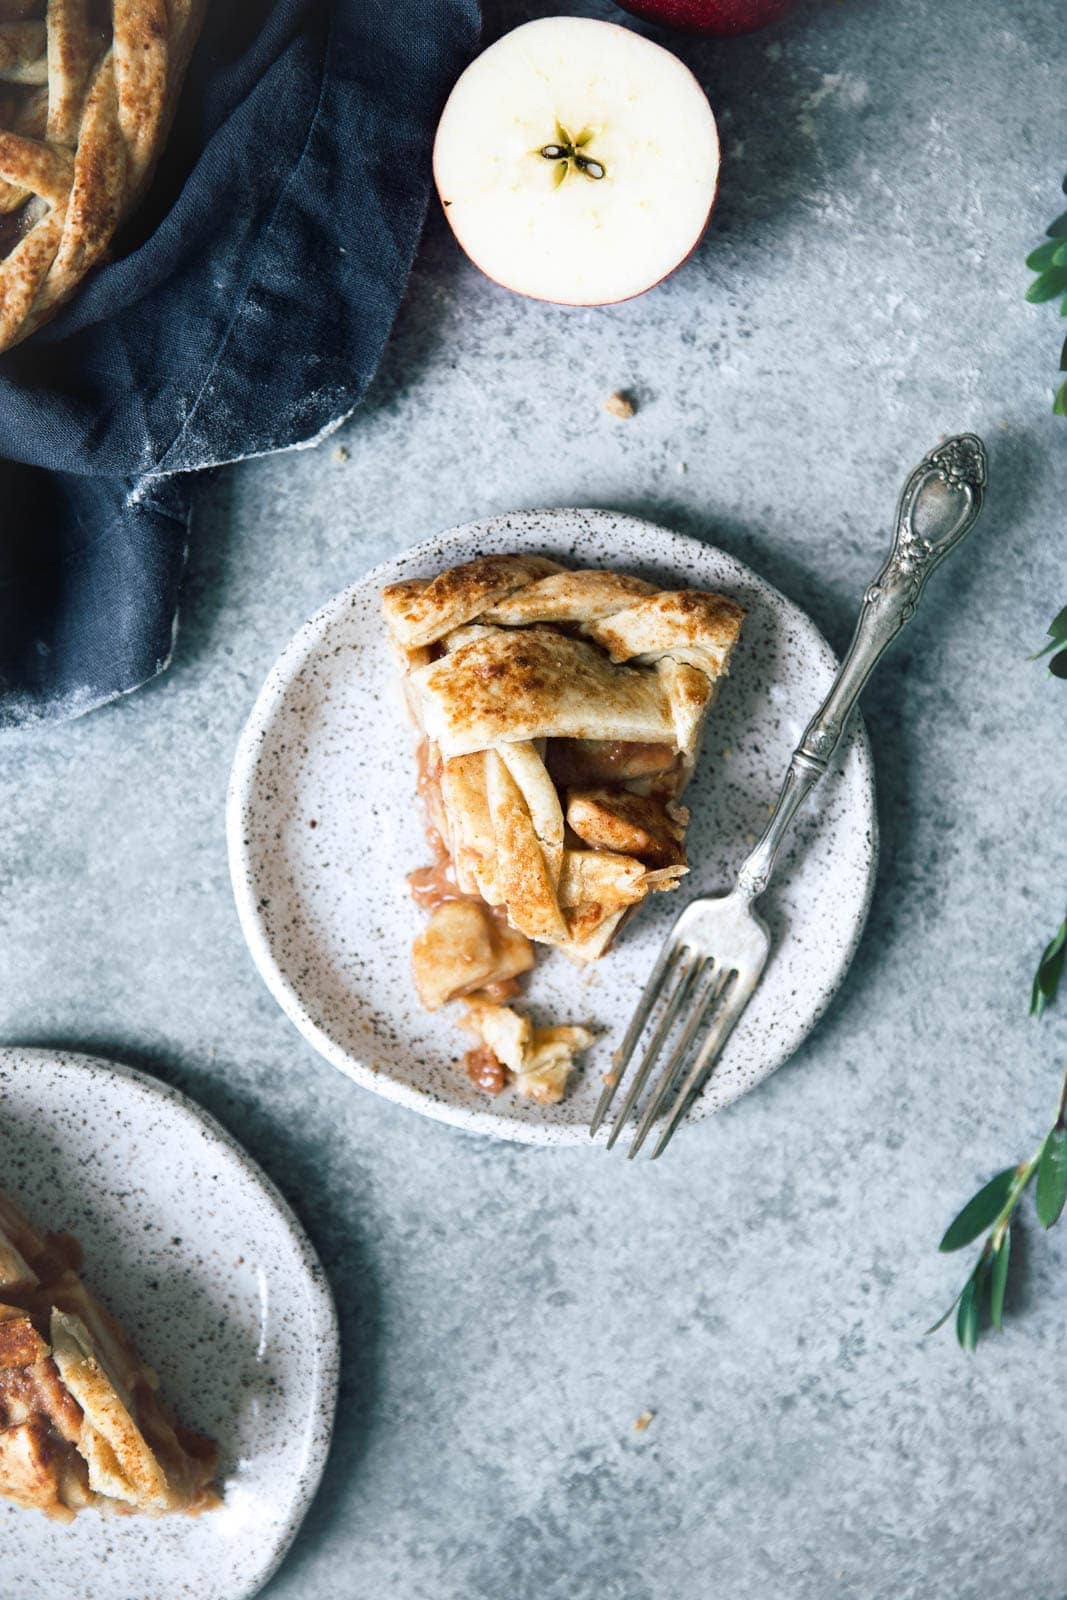 There's nothing better than homemade Apple Pie. Except maybe Salted Maple Caramel Apple Pie.